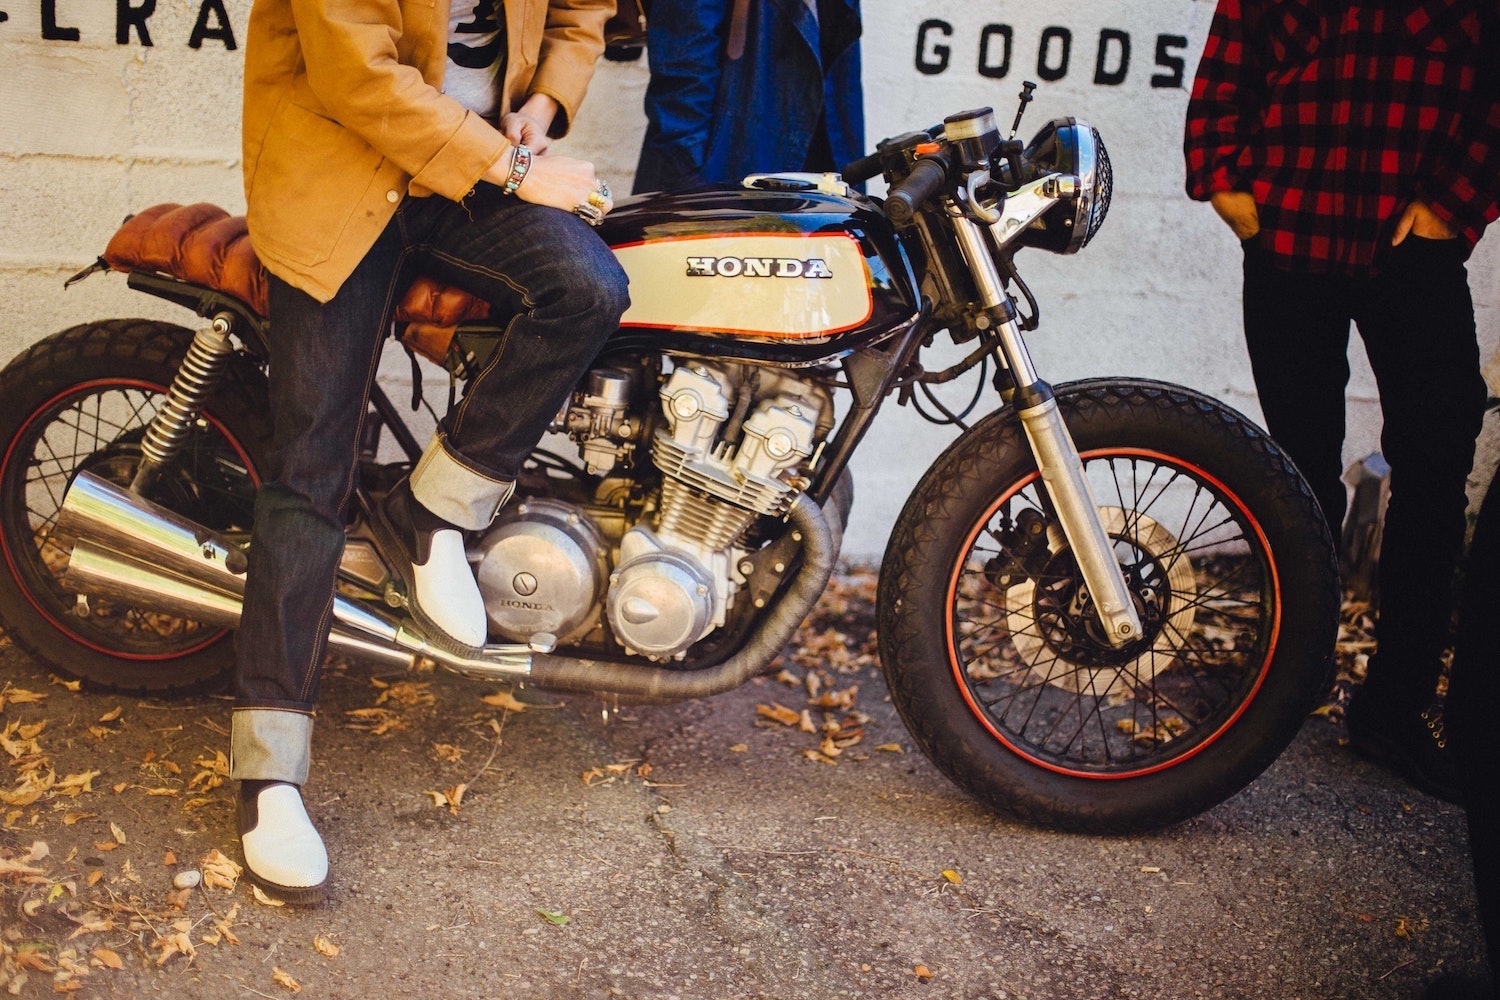 Customized cafe racer motorcycle parked by a brick wall, its rider sitting atop its seat, two other people's legs visible nearby.